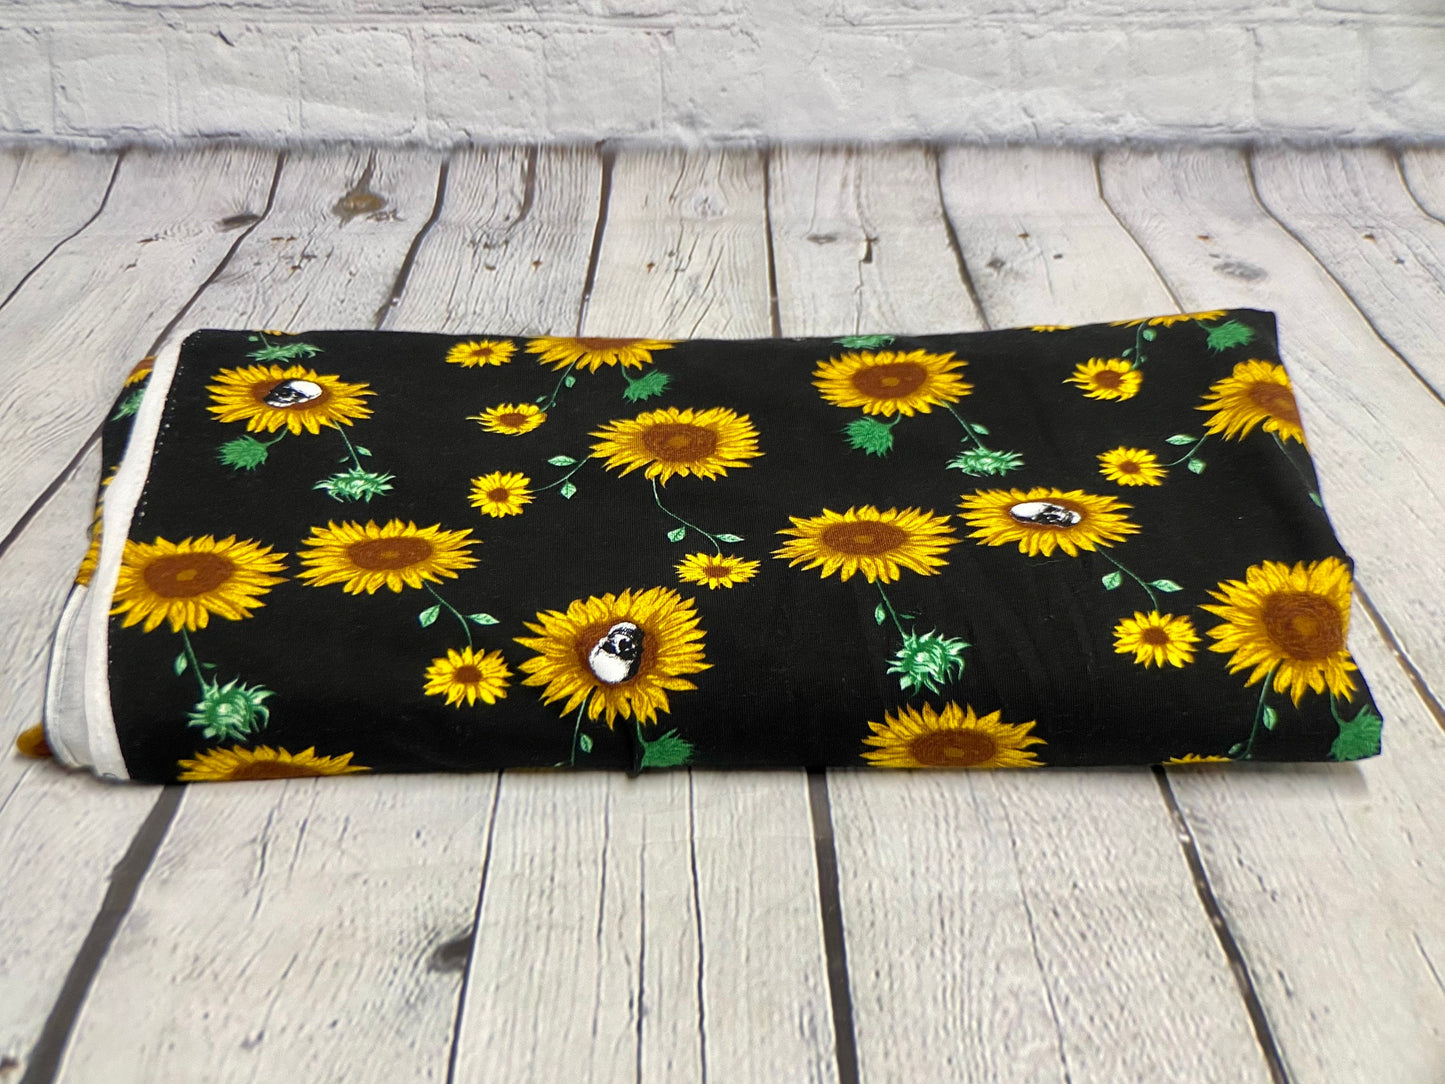 Heavy Weight Cotton Spandex 4 Way Stretch Sunflower Skull Gothic Print Fabric By The Yard 240 GSM